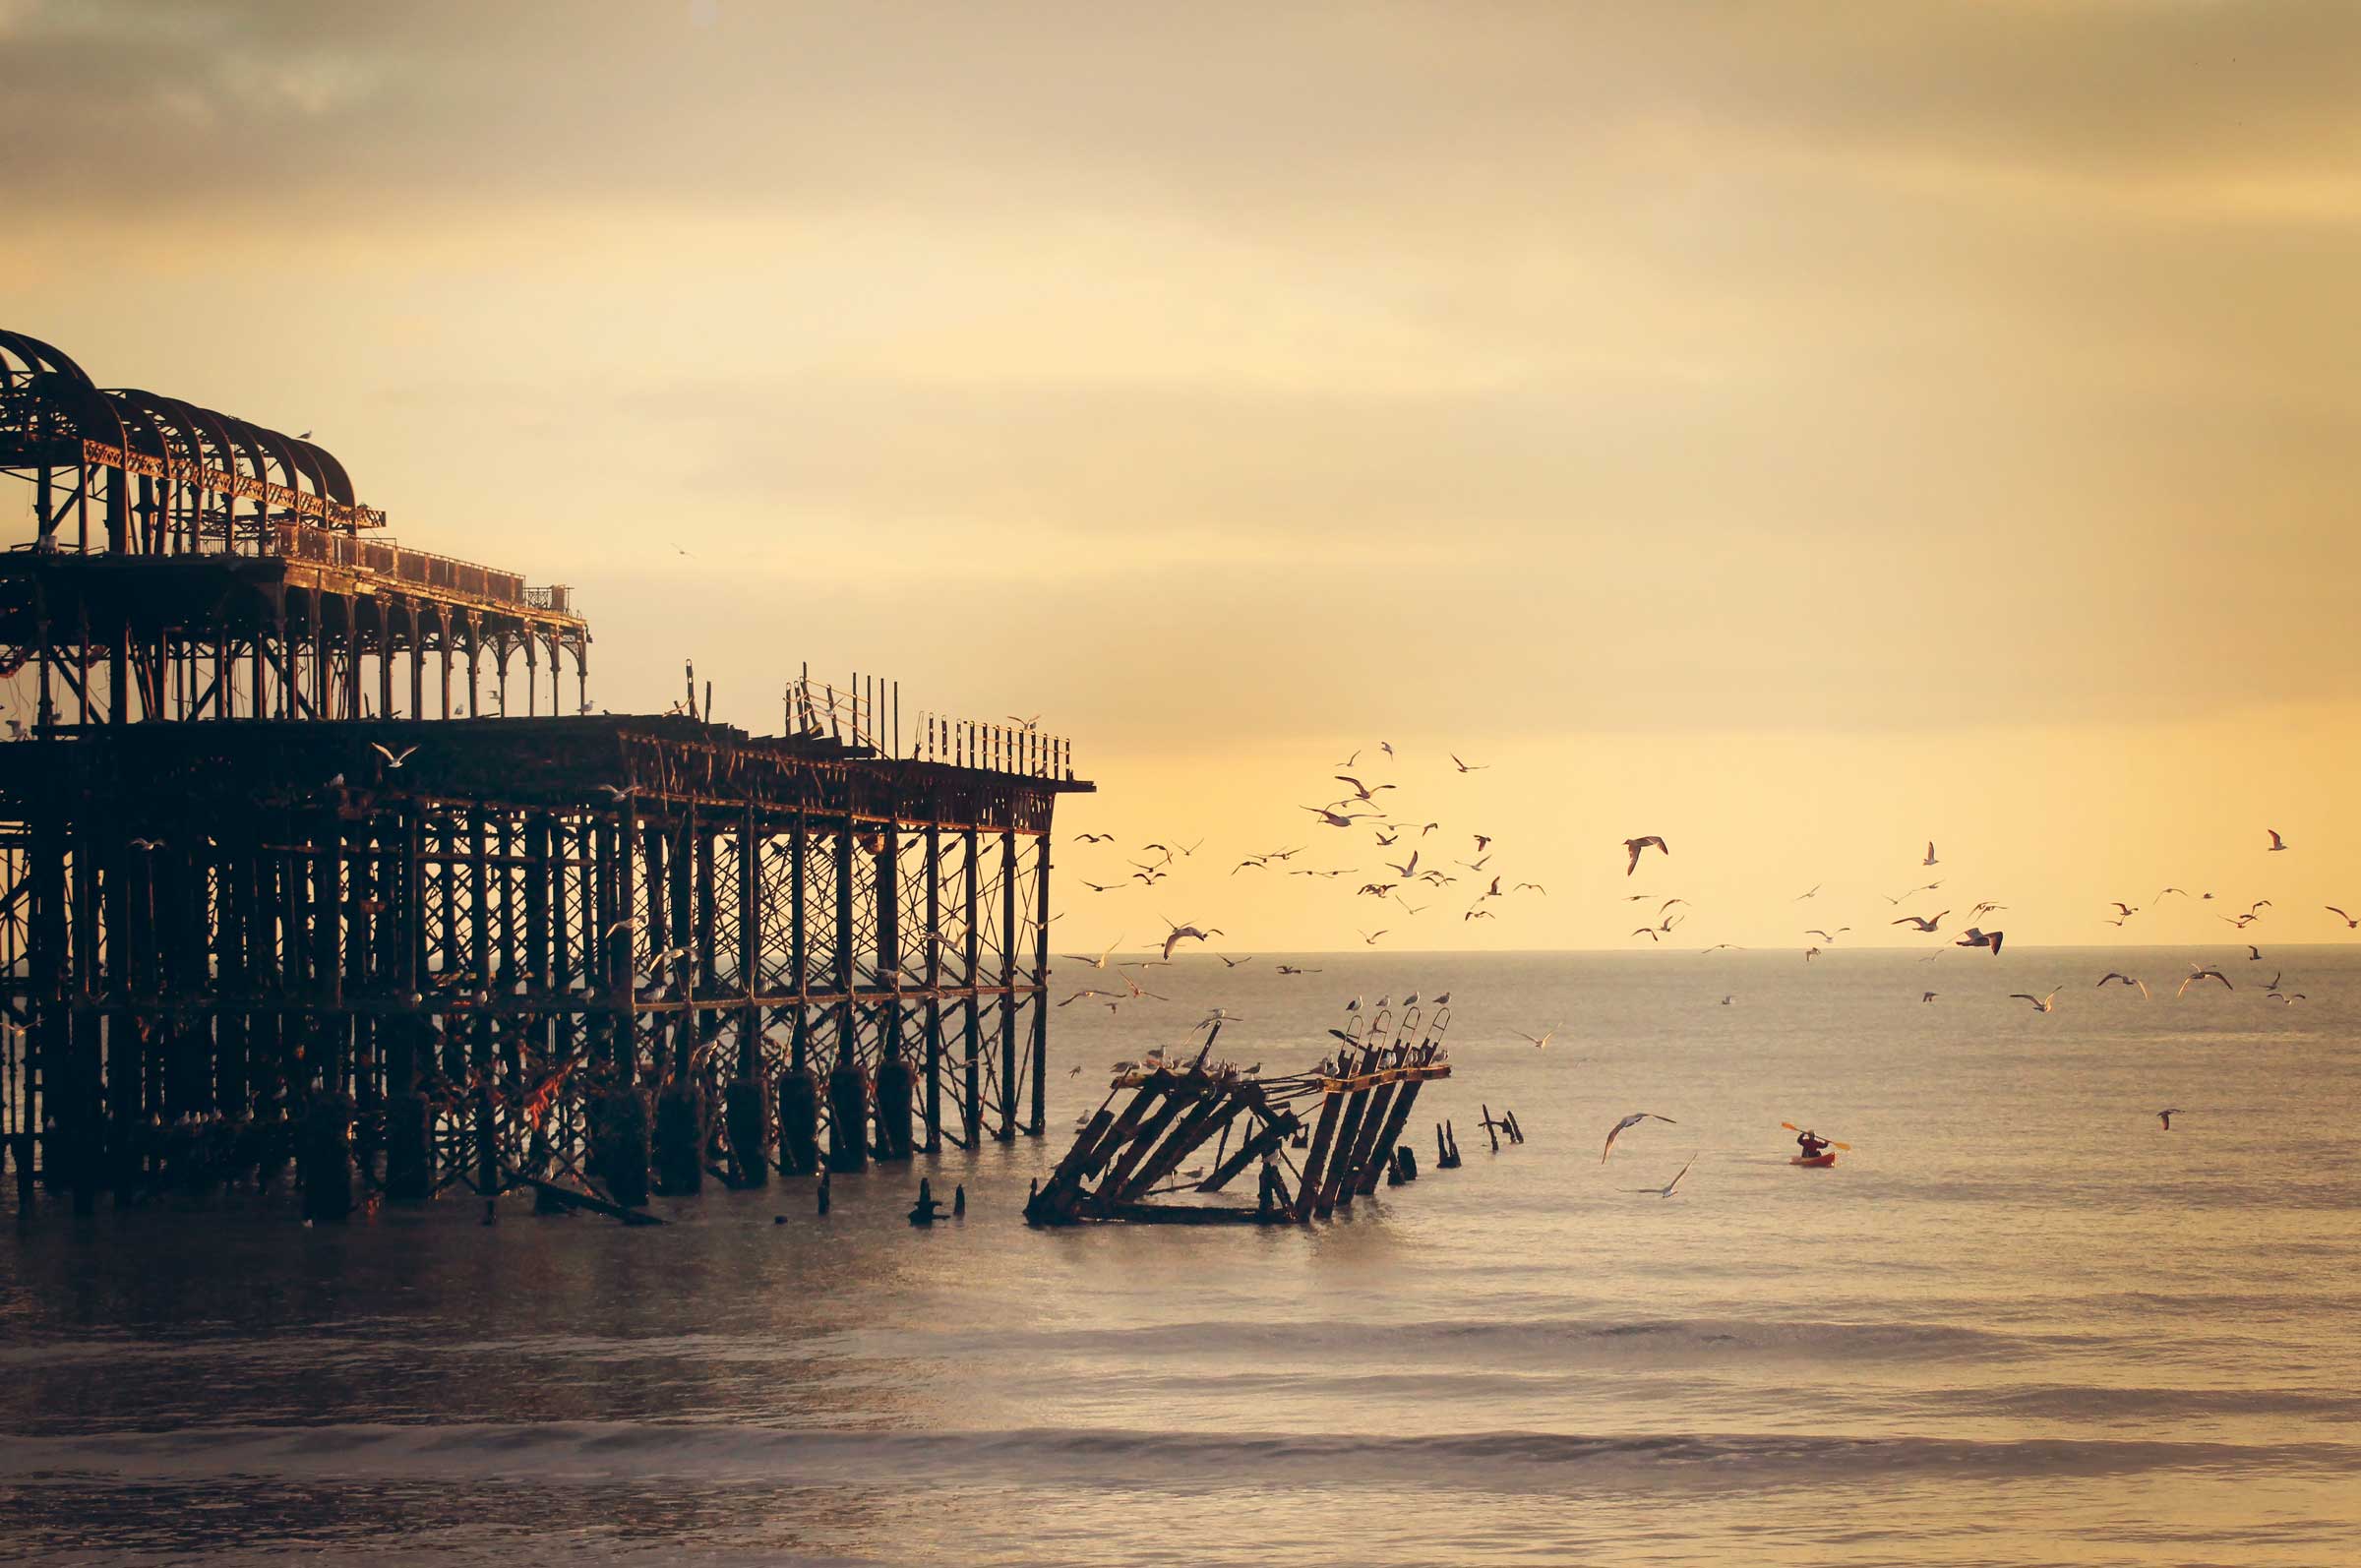 A pier with seagulls.